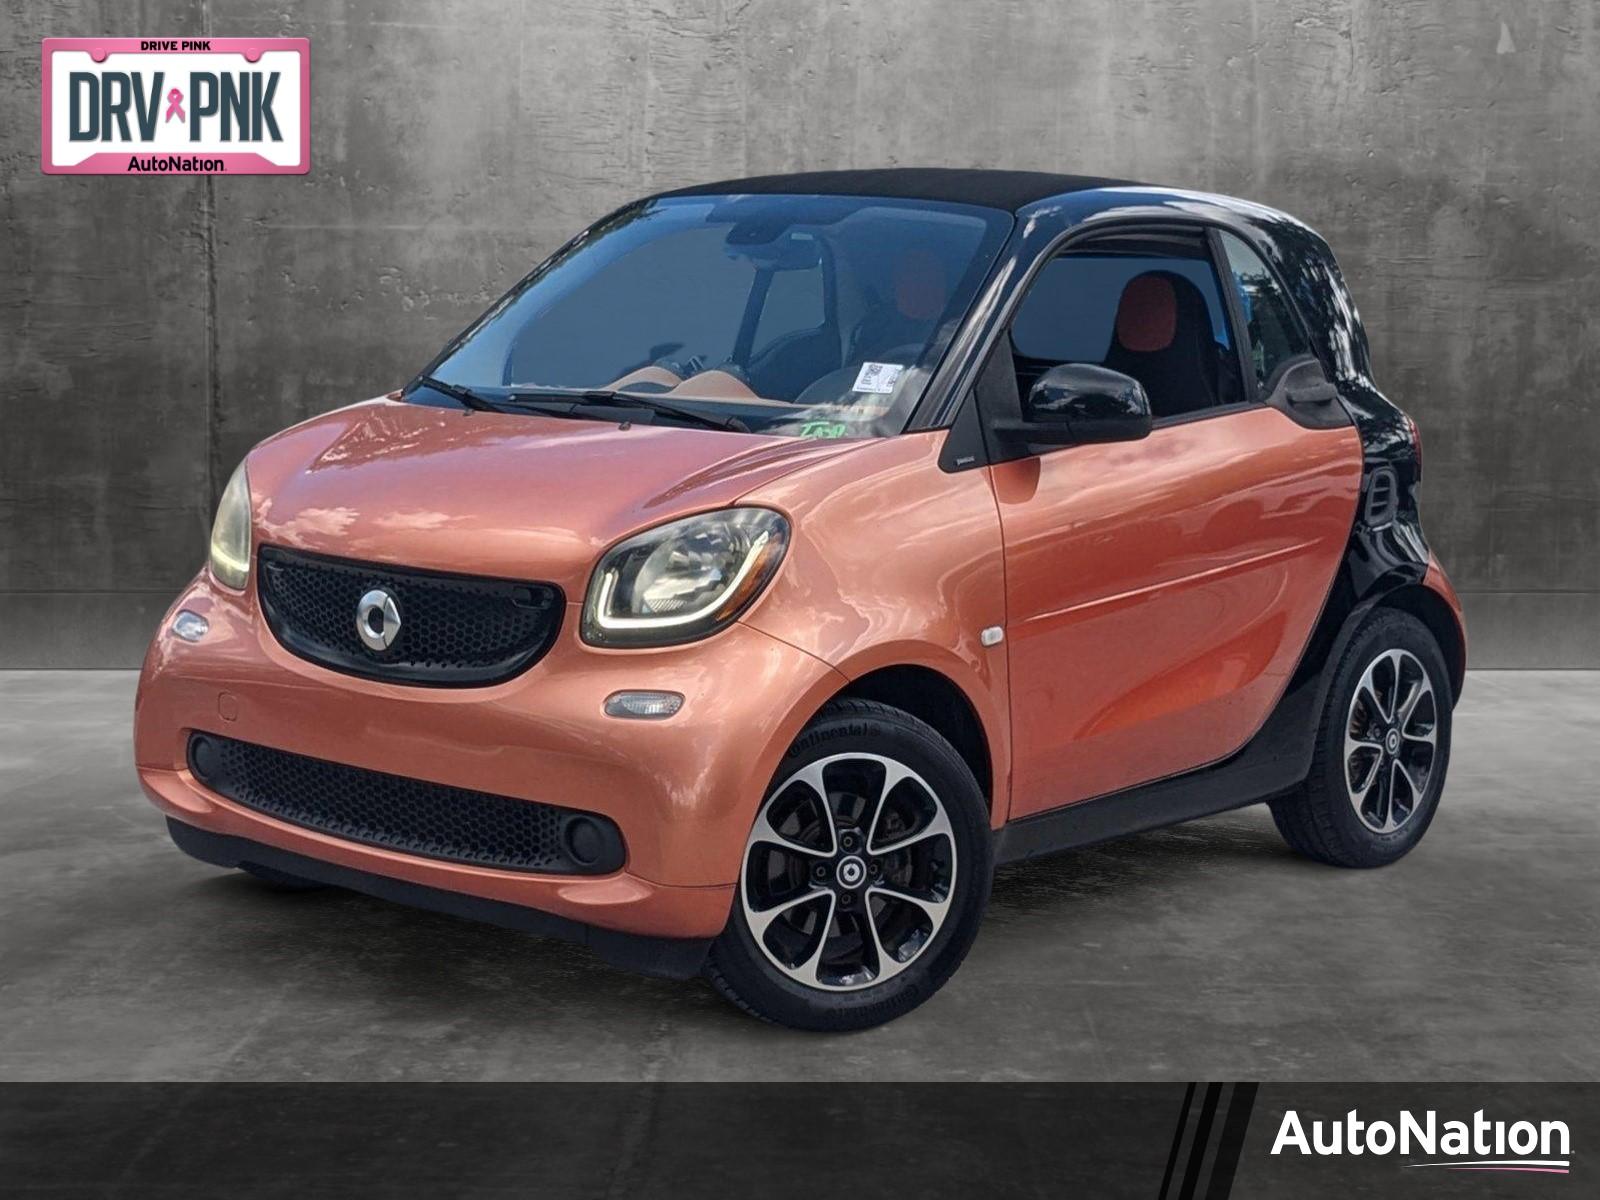 2016 smart fortwo Vehicle Photo in Coconut Creek, FL 33073